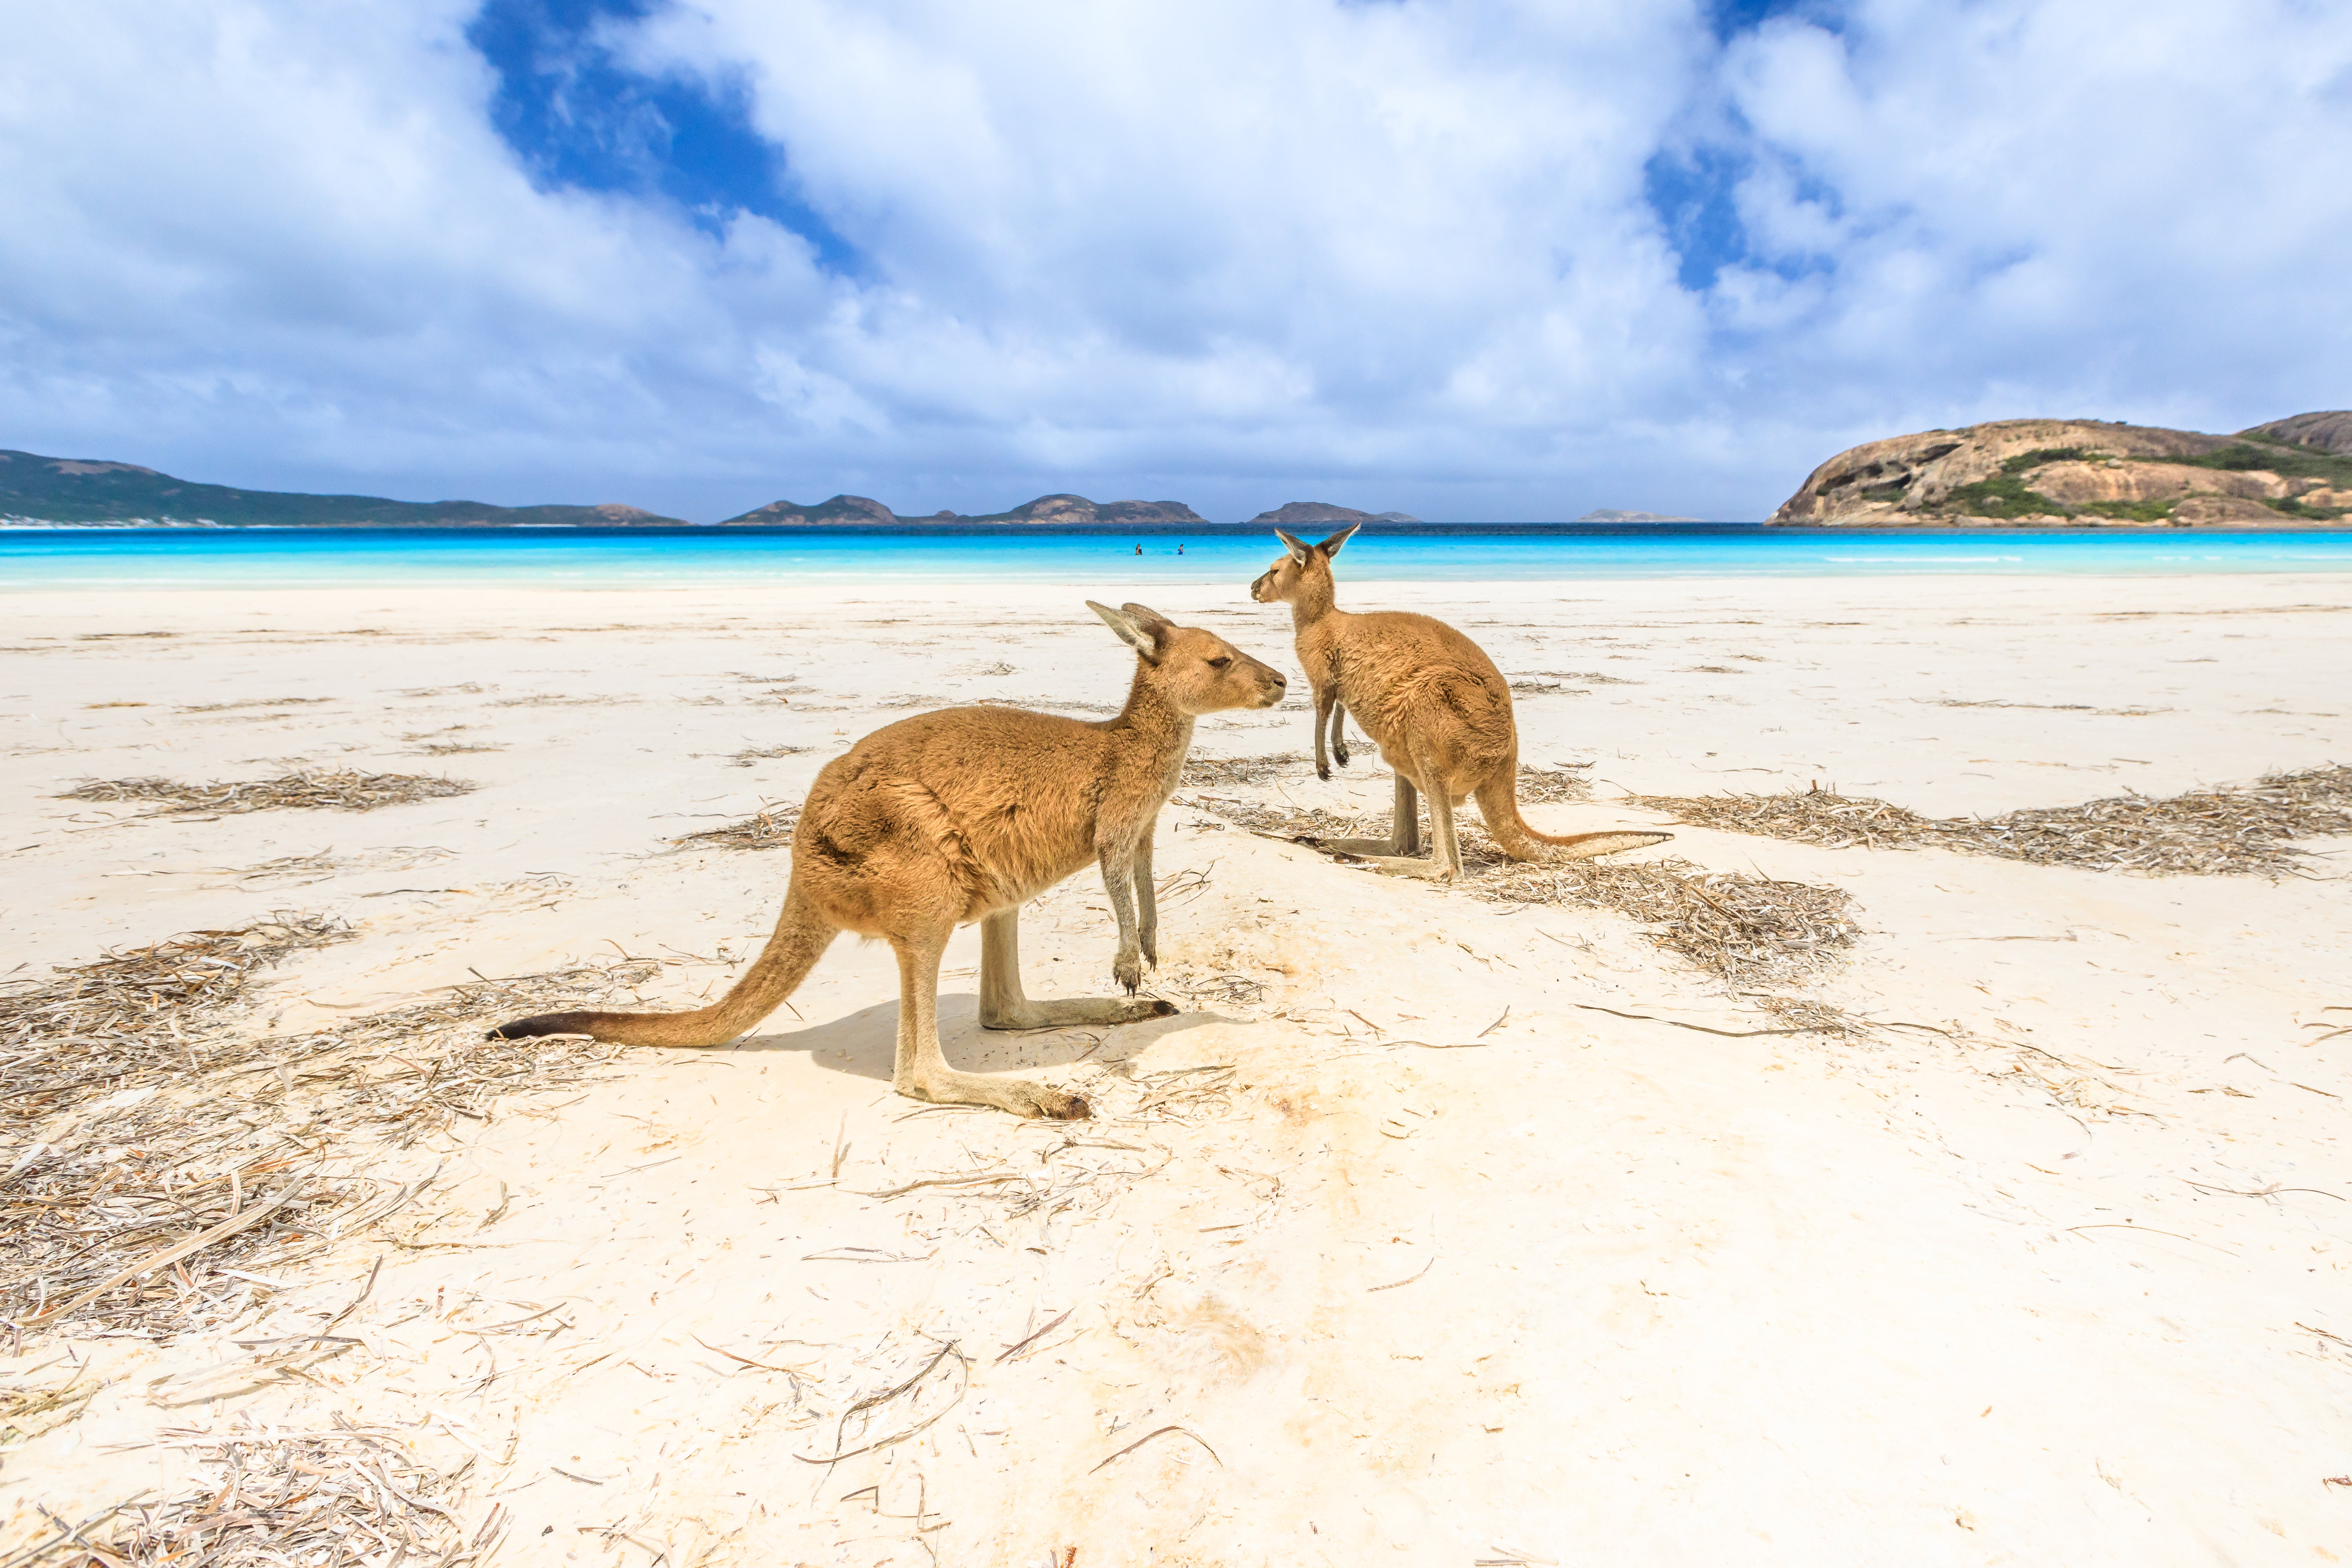 Kick back with some local kangaroos as you top up your tan on Lucky Bay